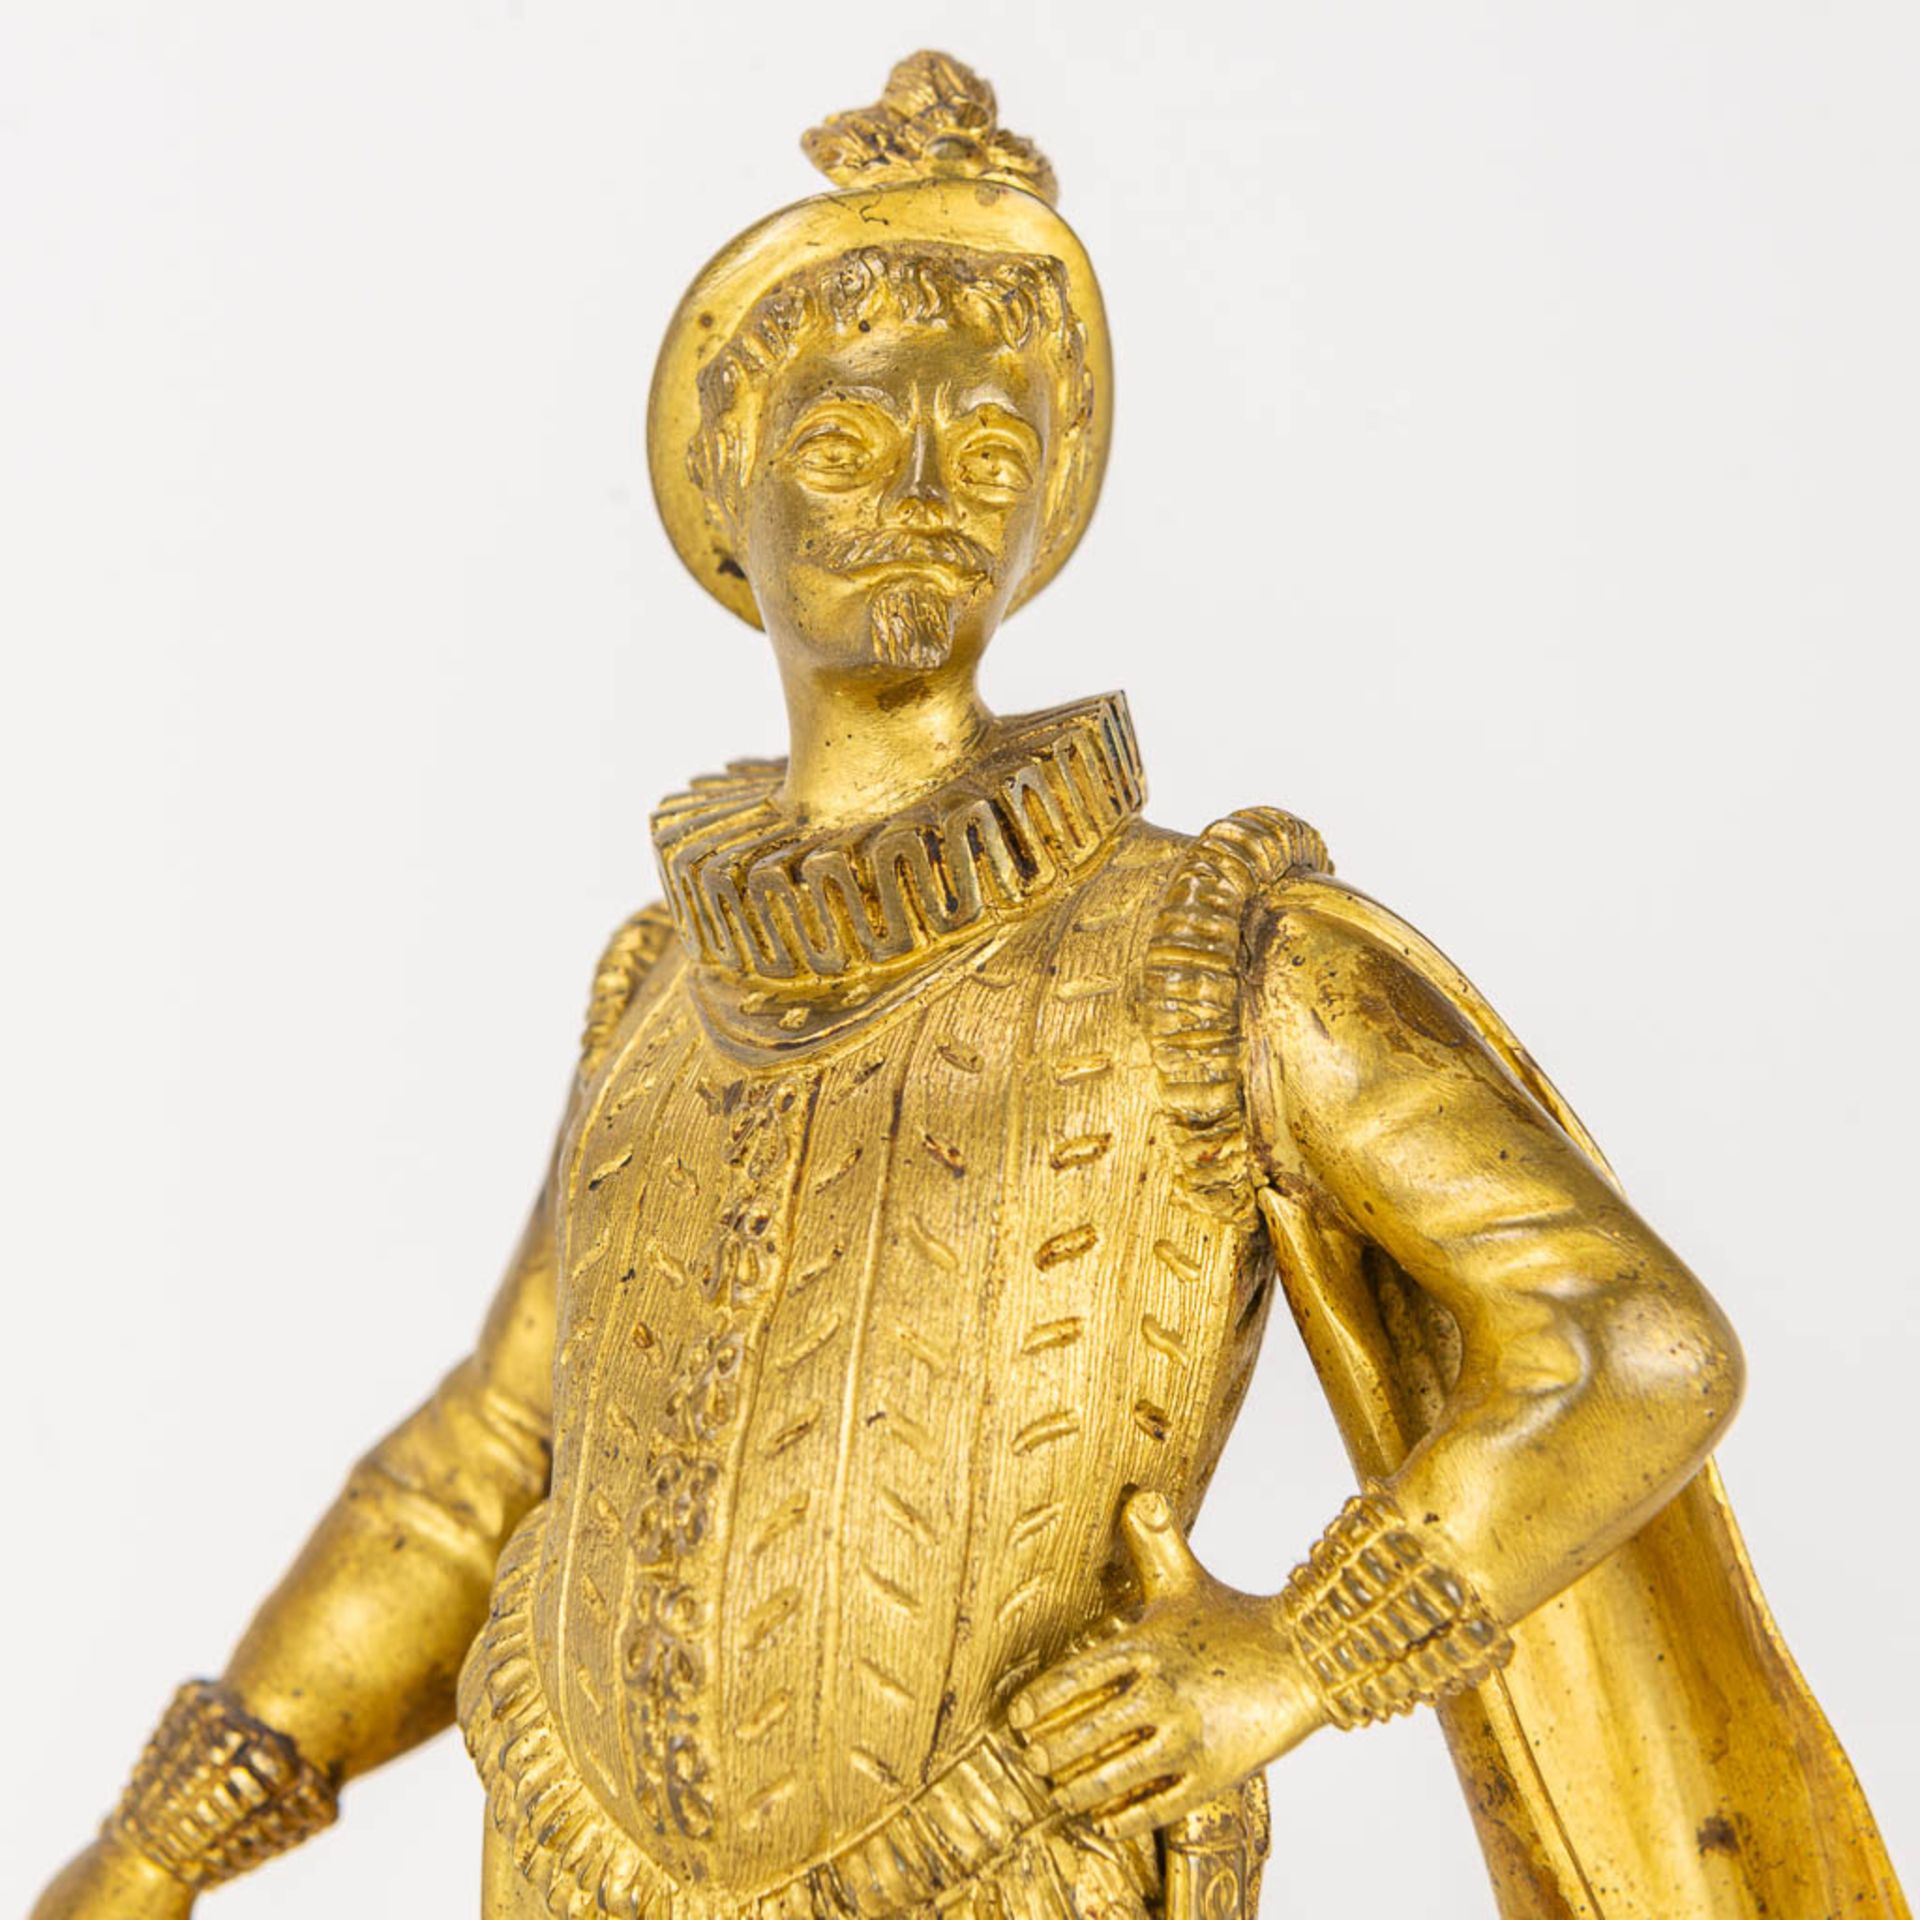 A pair of gilt Conquistadores statues made of gilt bronze and standing on a white marble base. - Image 9 of 9